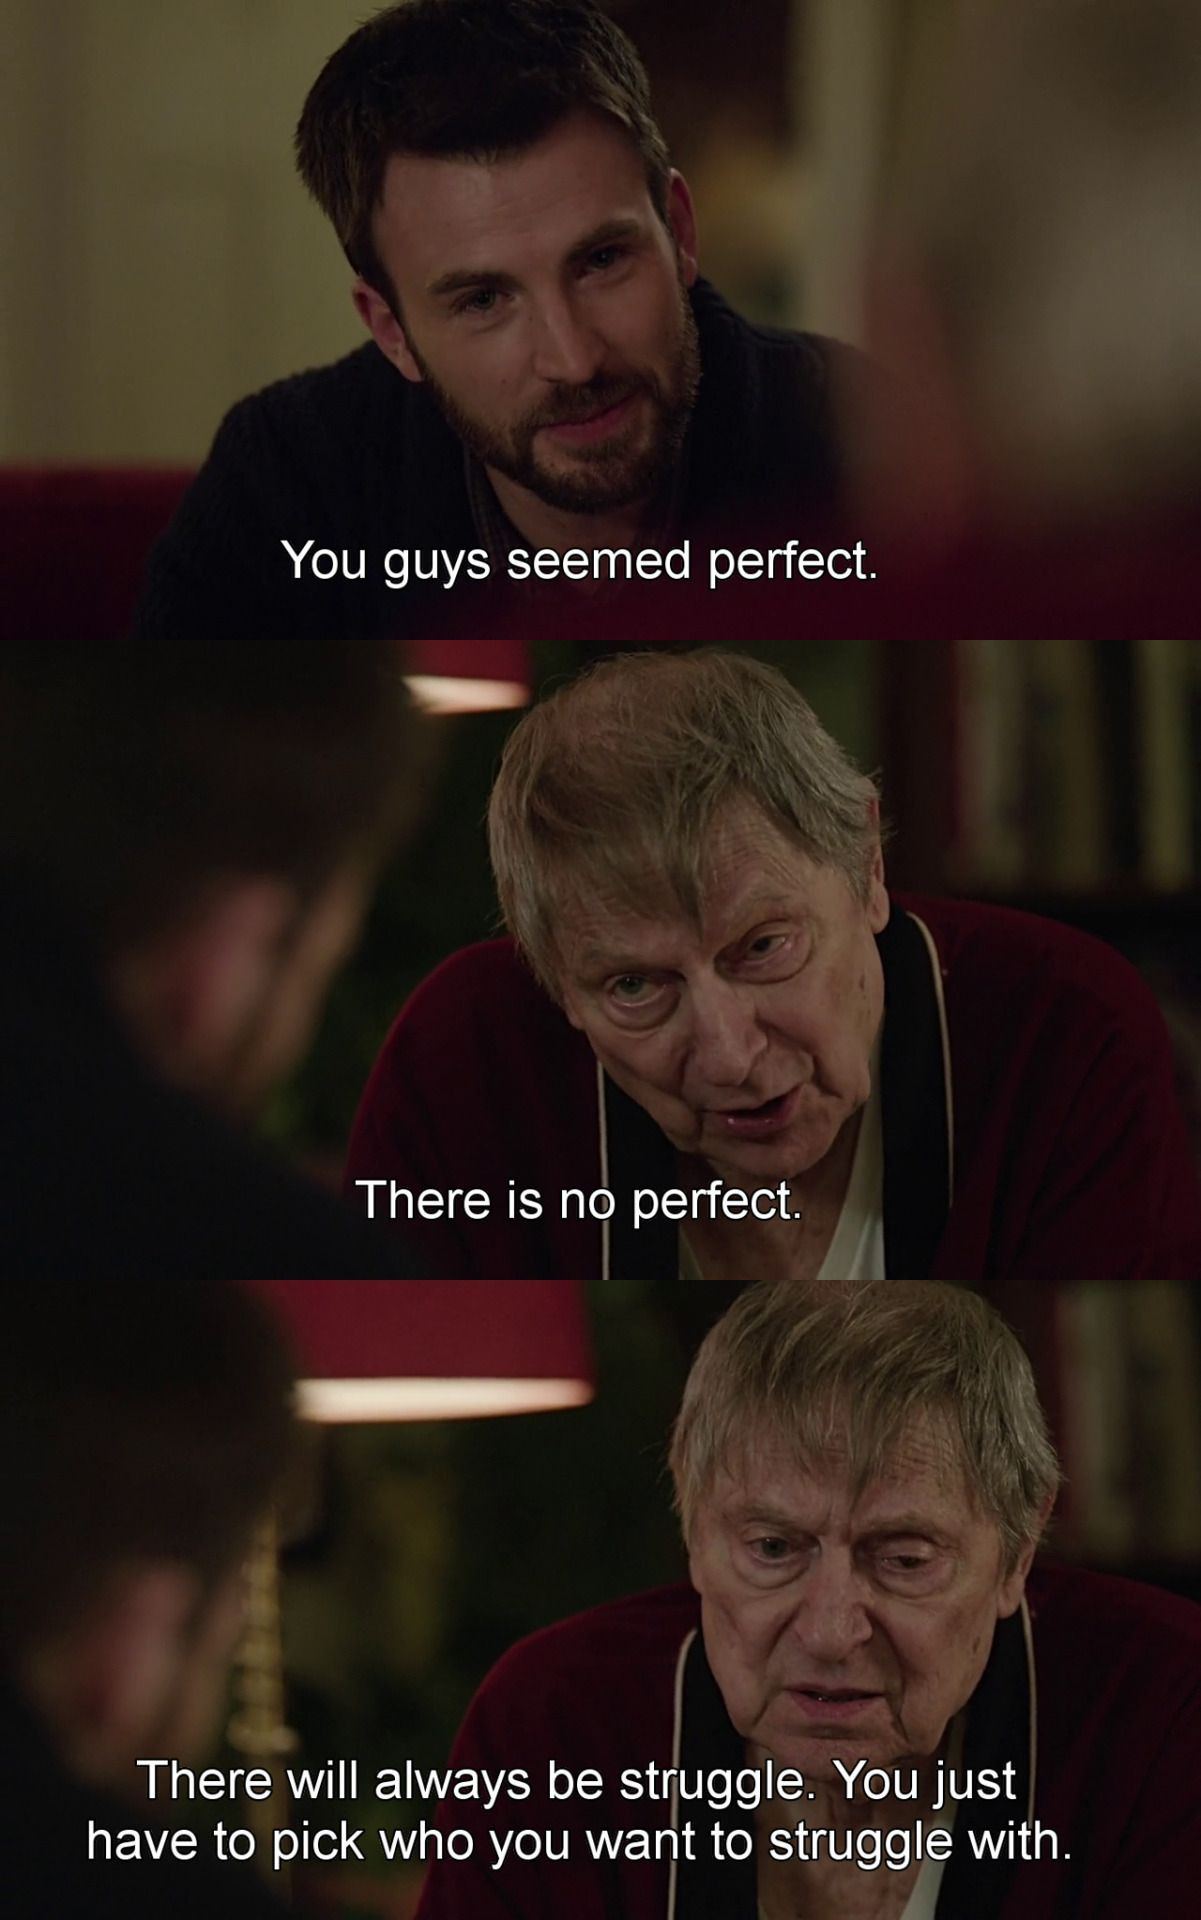 Quotes From Romantic Movies
 Before We Go 2014 dir Chris Evans